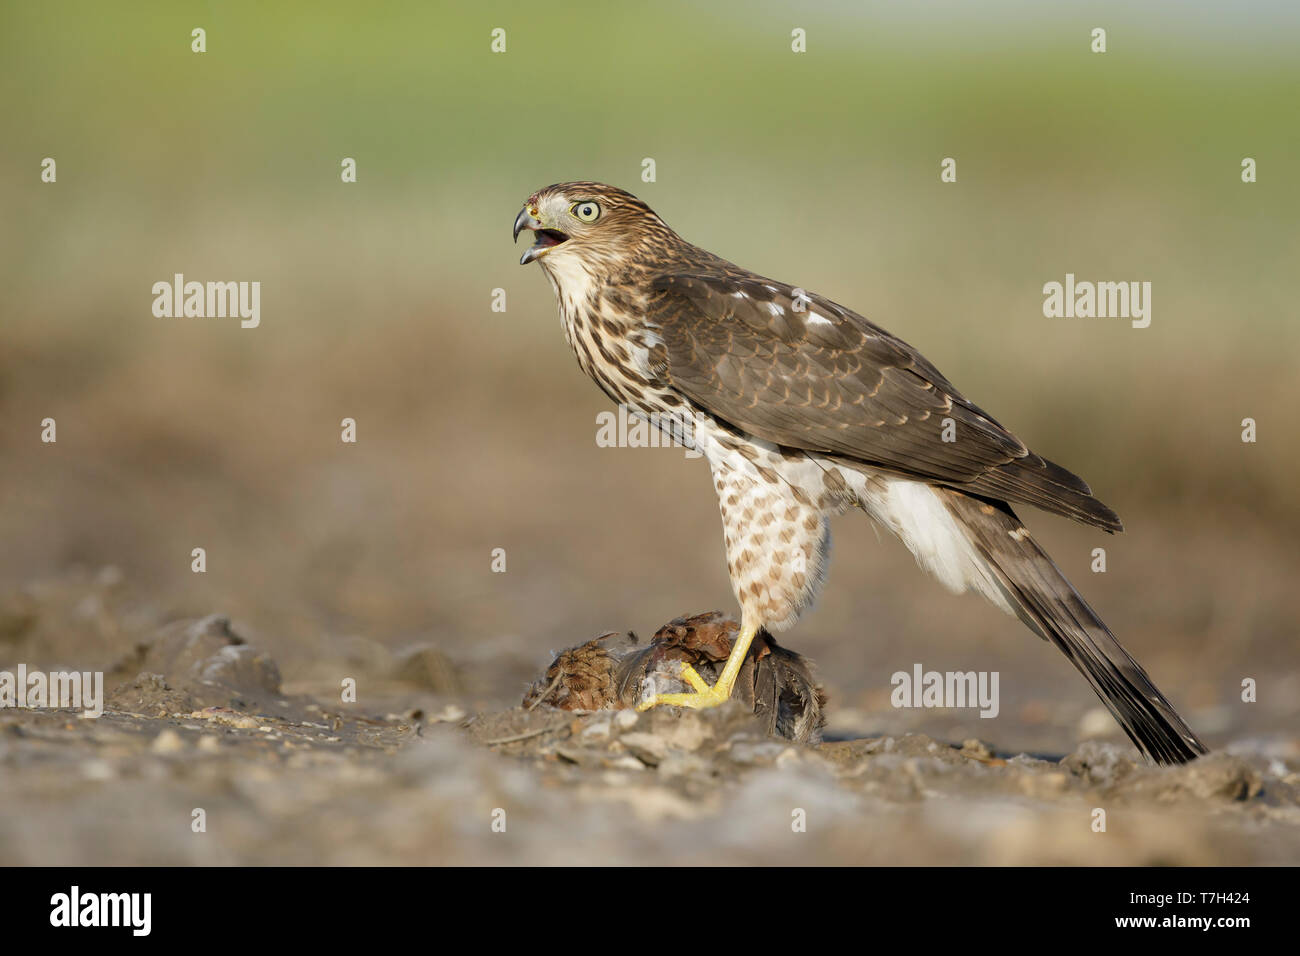 Immature Cooper's Hawk (Accipiter cooperii)  sitting on top of a caught prey in Chambers County, Texas, USA. Seen from the side. Stock Photo